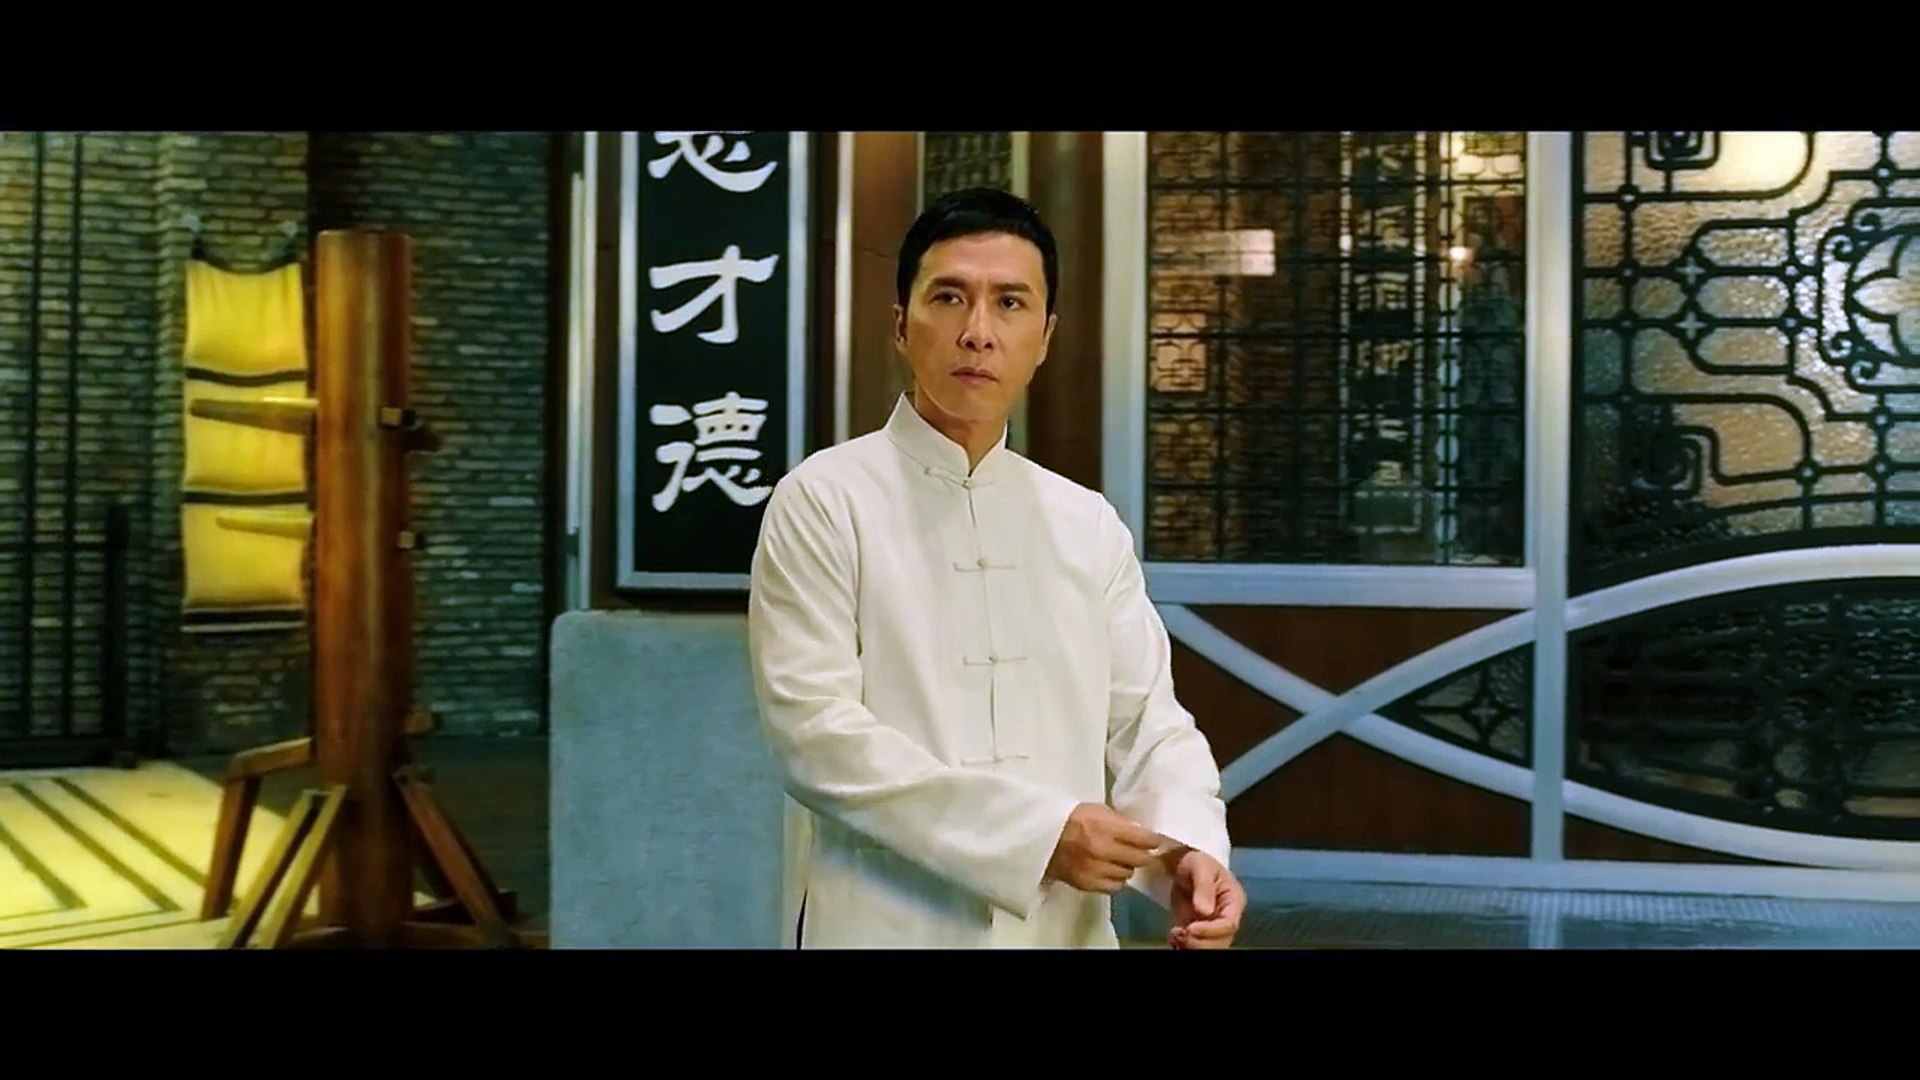 Ip Man 3 Official Teaser Trailer 1 (2015) - Donnie Yen, Mike Tyson Action Movie HD new action movies